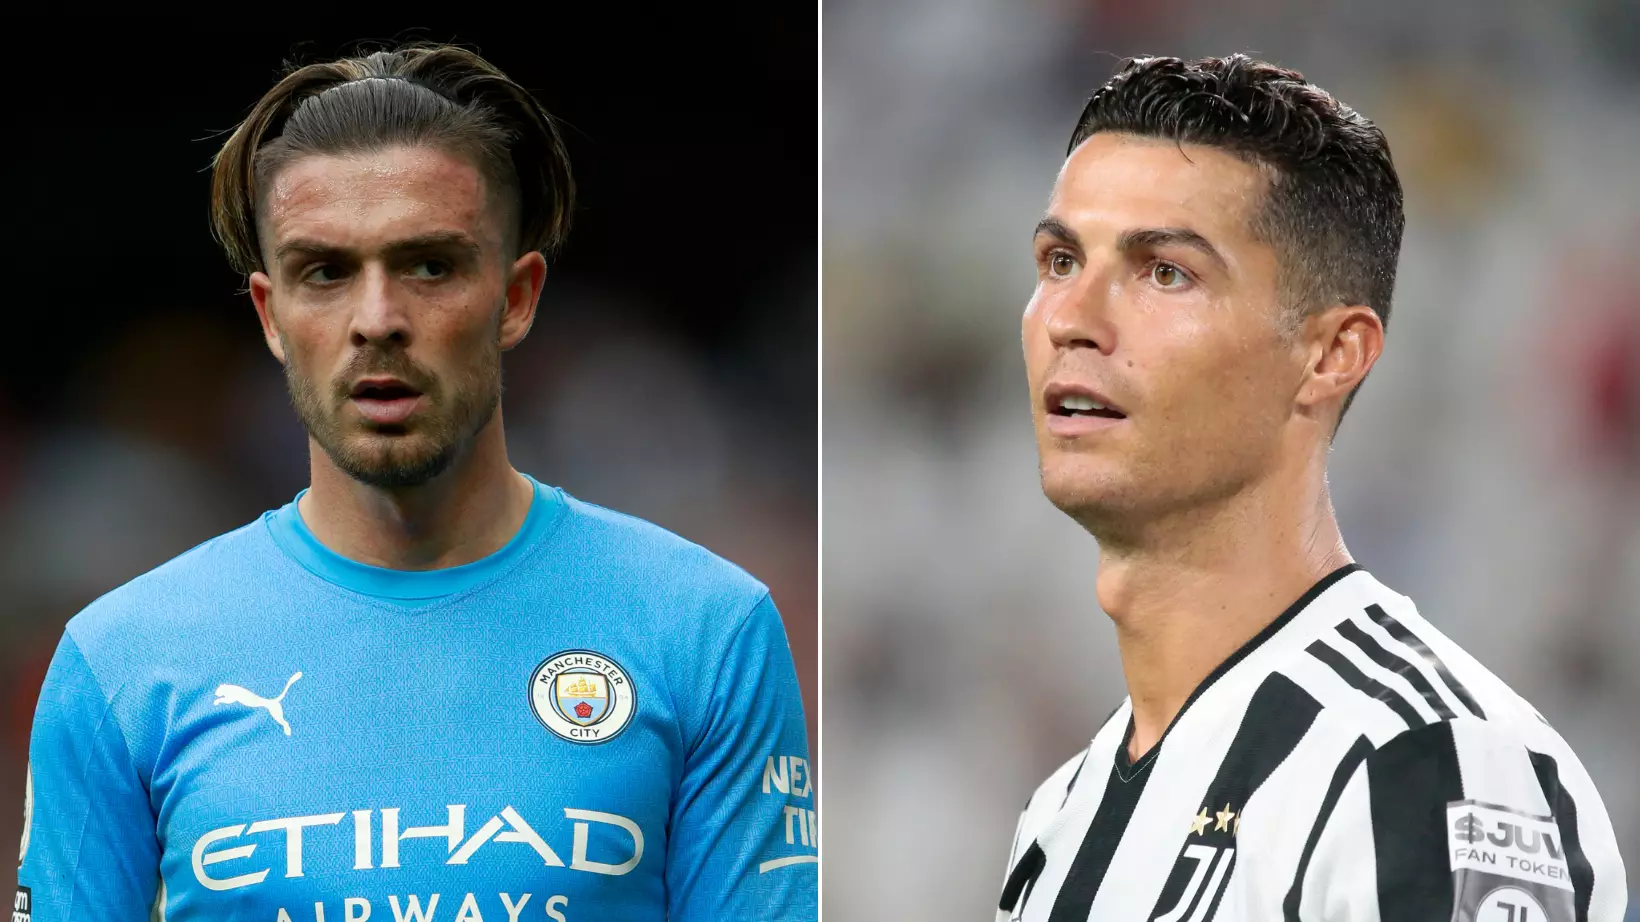 Jack Grealish's Old Tweets About Cristiano Ronaldo Resurface Ahead Of Potential Link-Up At Man City